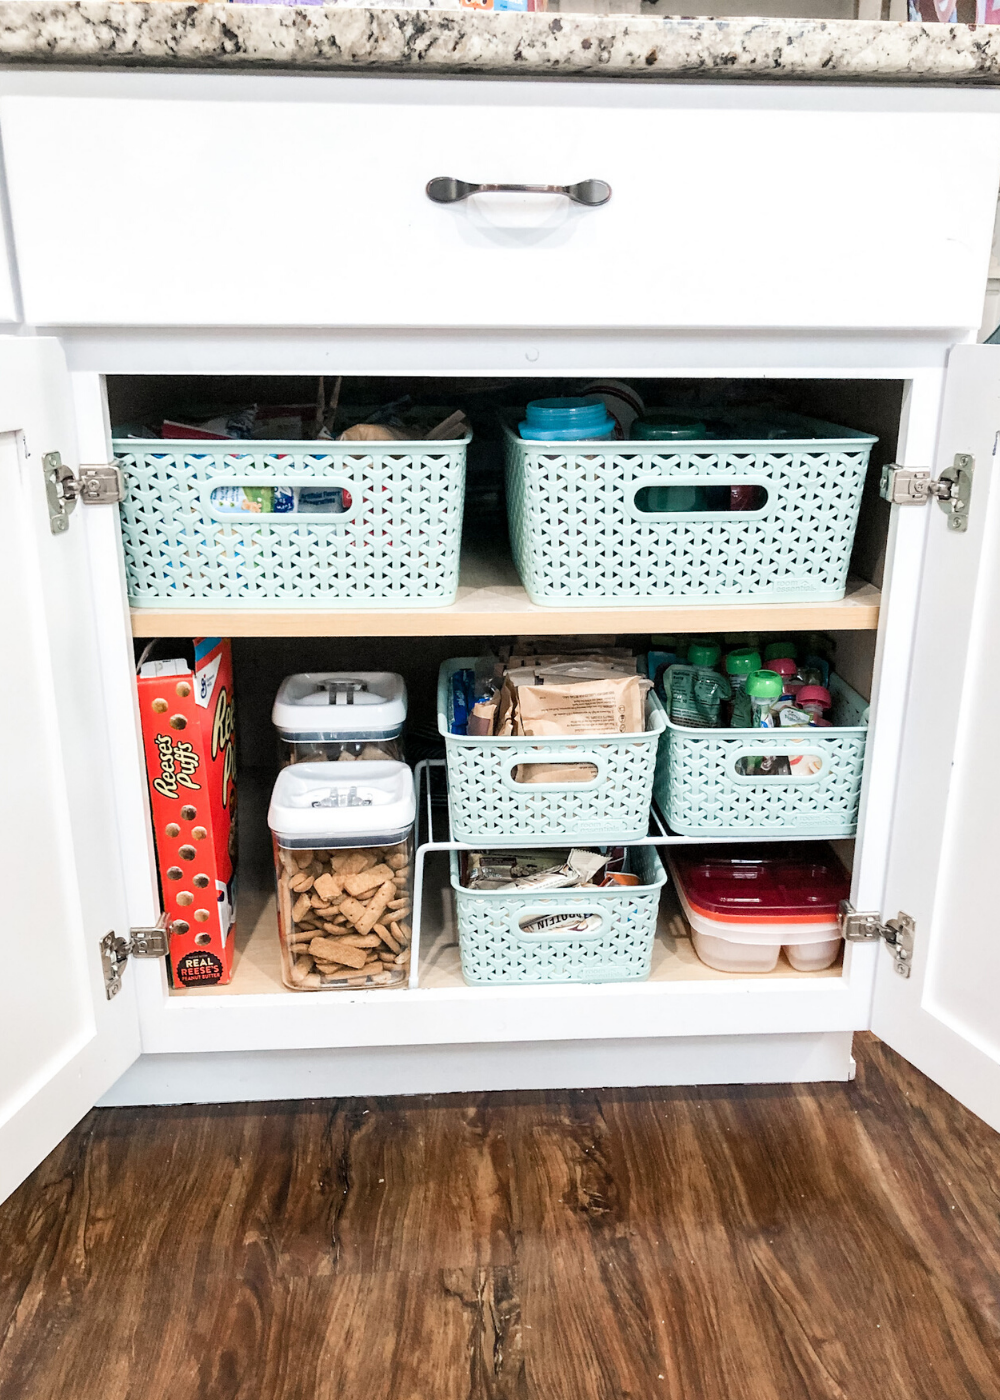 https://www.thesimplyorganizedhome.com/wp-content/uploads/2020/02/Kitchen-Organization-Snack-Cabinet.png